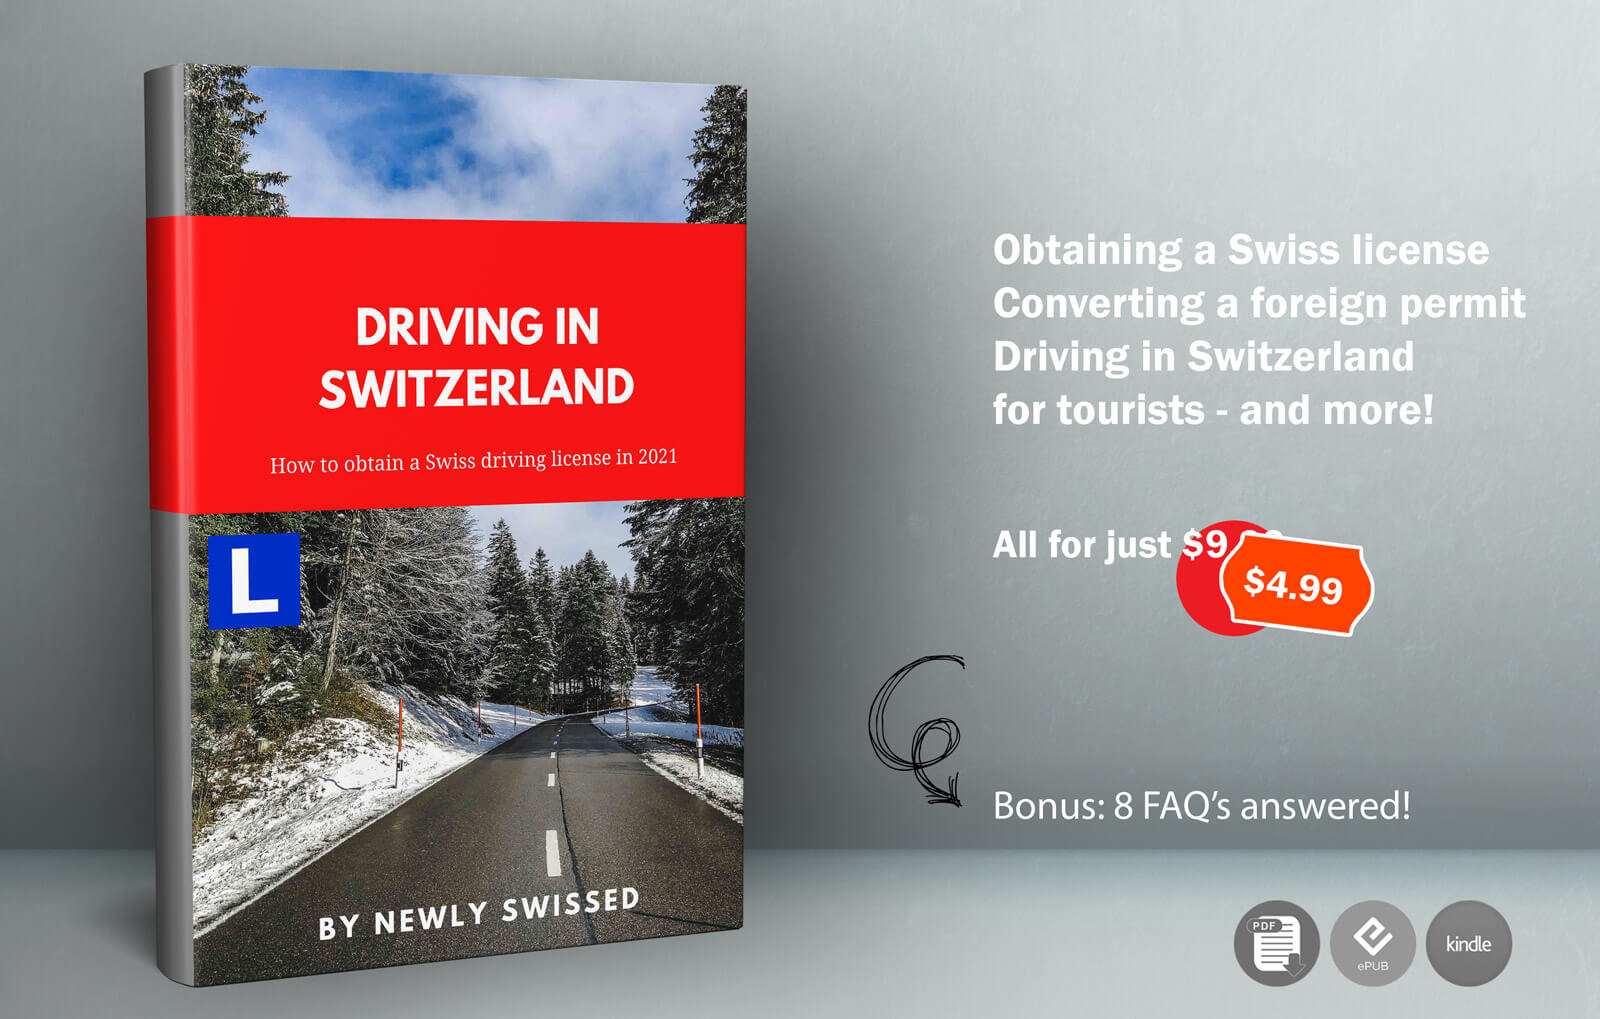 An e-book guide about driving in Switzerland